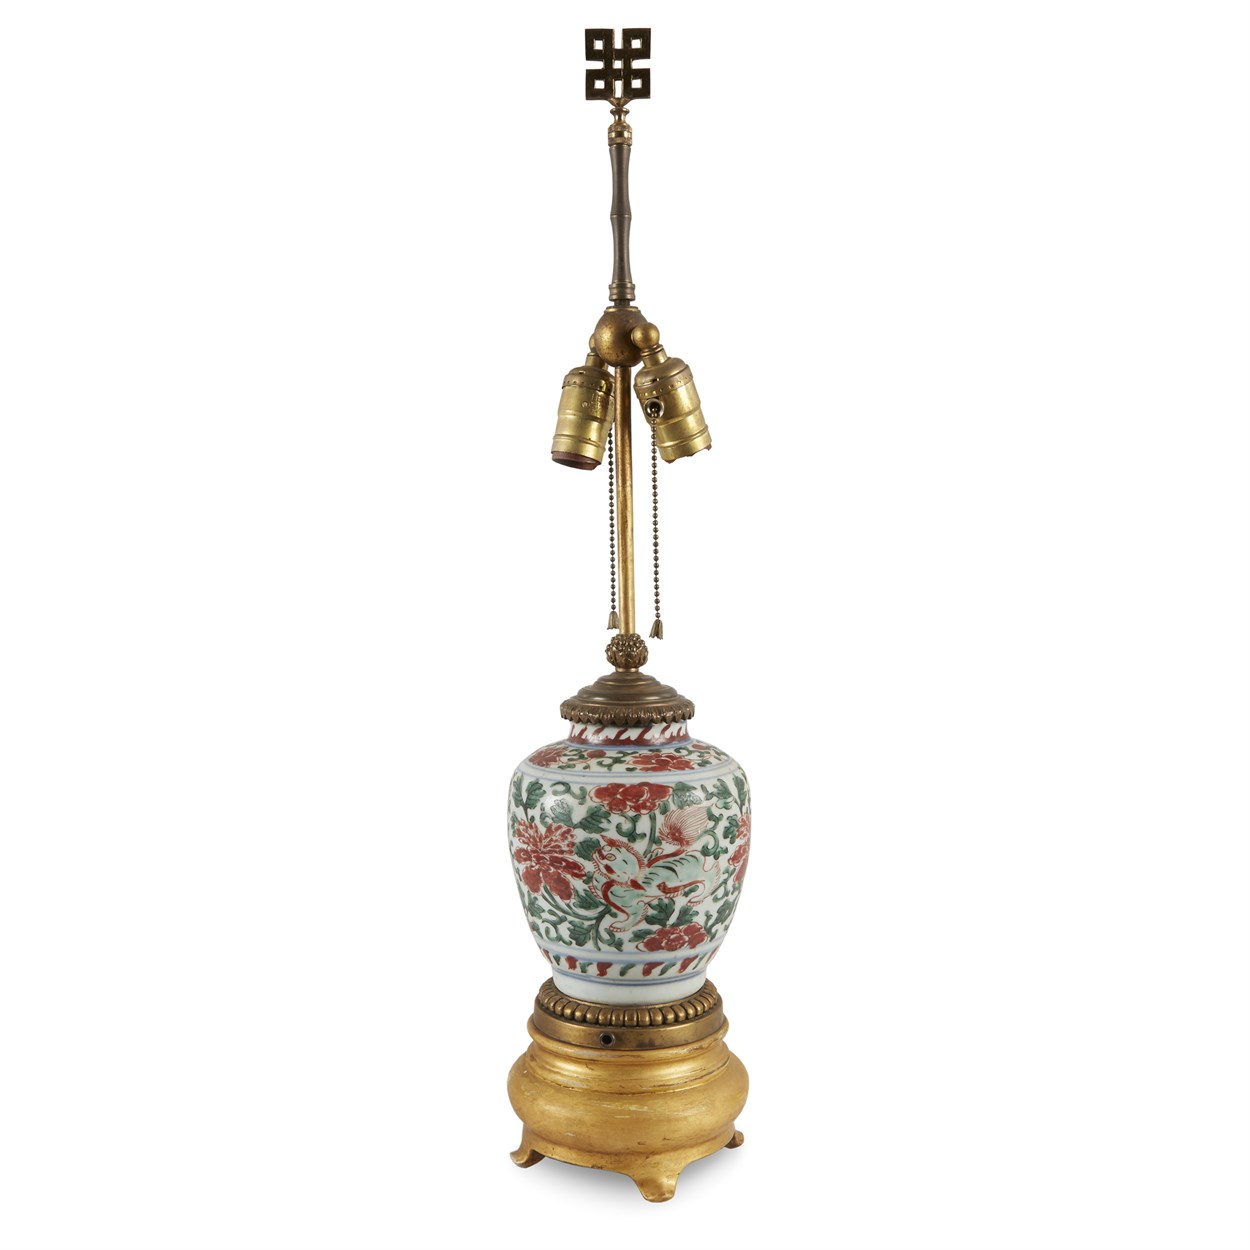 Lot 94 - A Chinese wucai-decorated porcelain "Lions and Peonies" jar, now mounted as a lamp